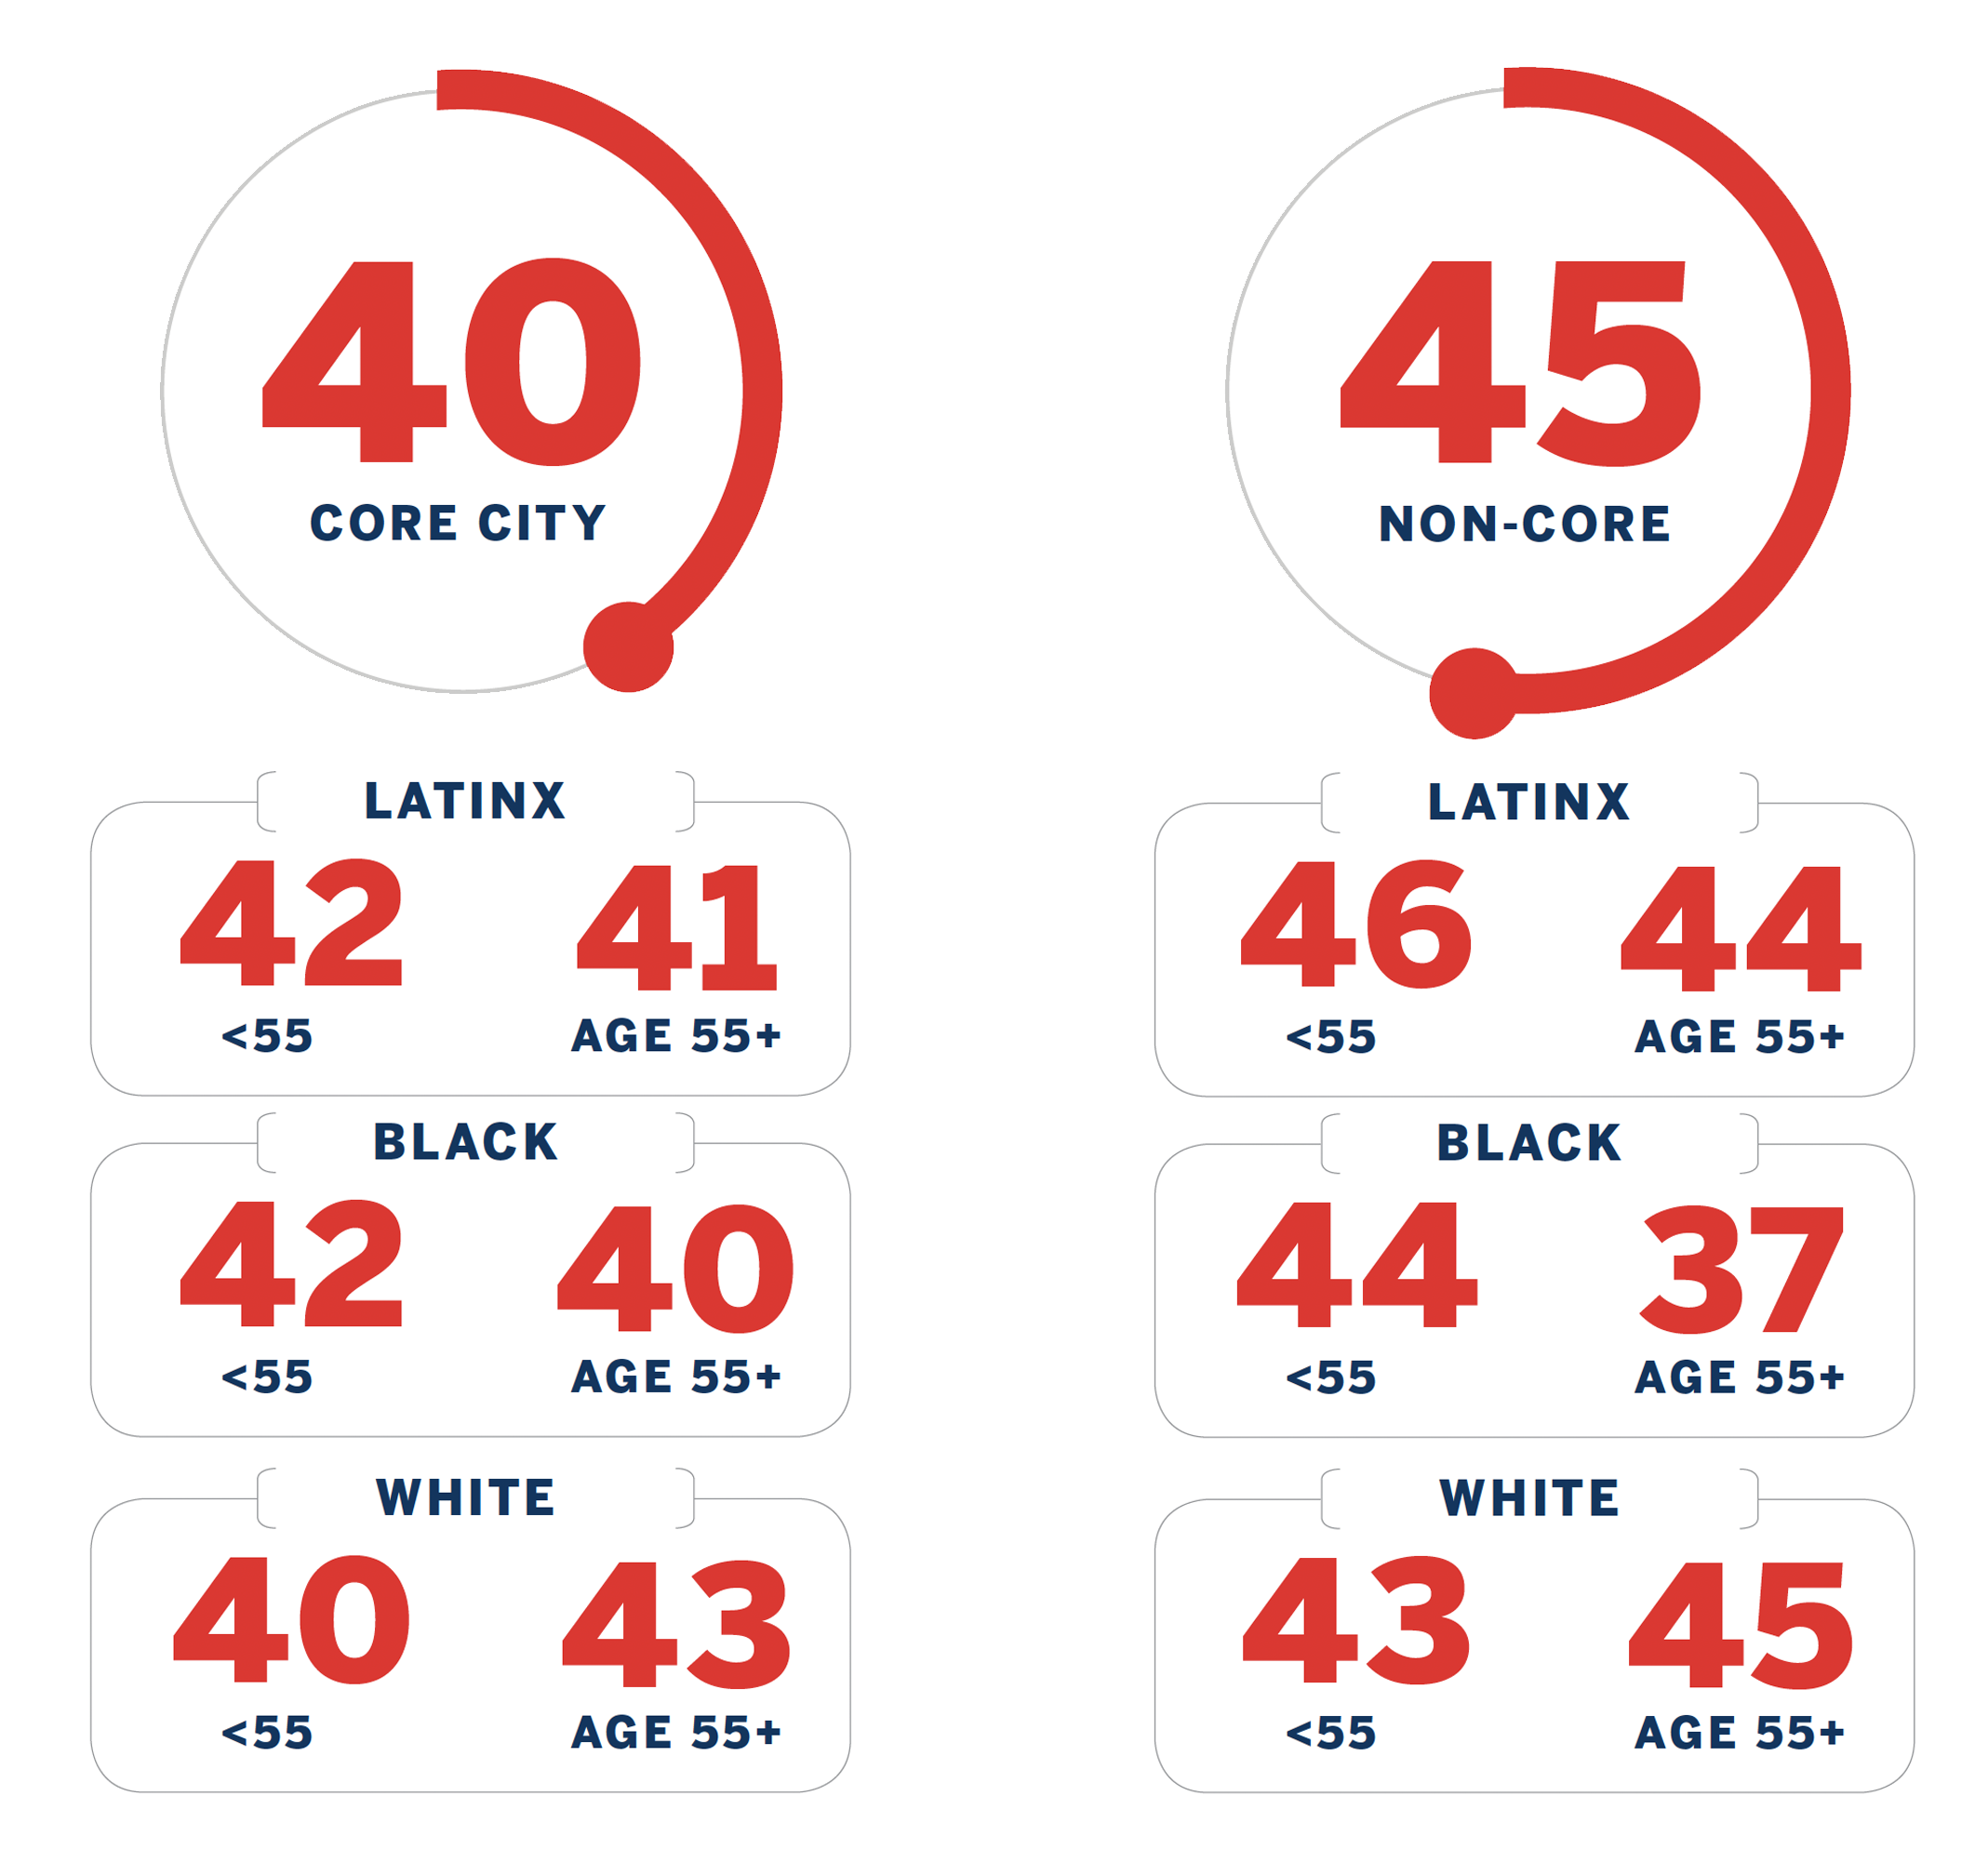 Chart breakdown: Core City: 40 (broken down by Latinx, Black, and White ages less than and over 55) Non-Core: 45 (broken down by Latinx, Black, and White ages less than and over 55)